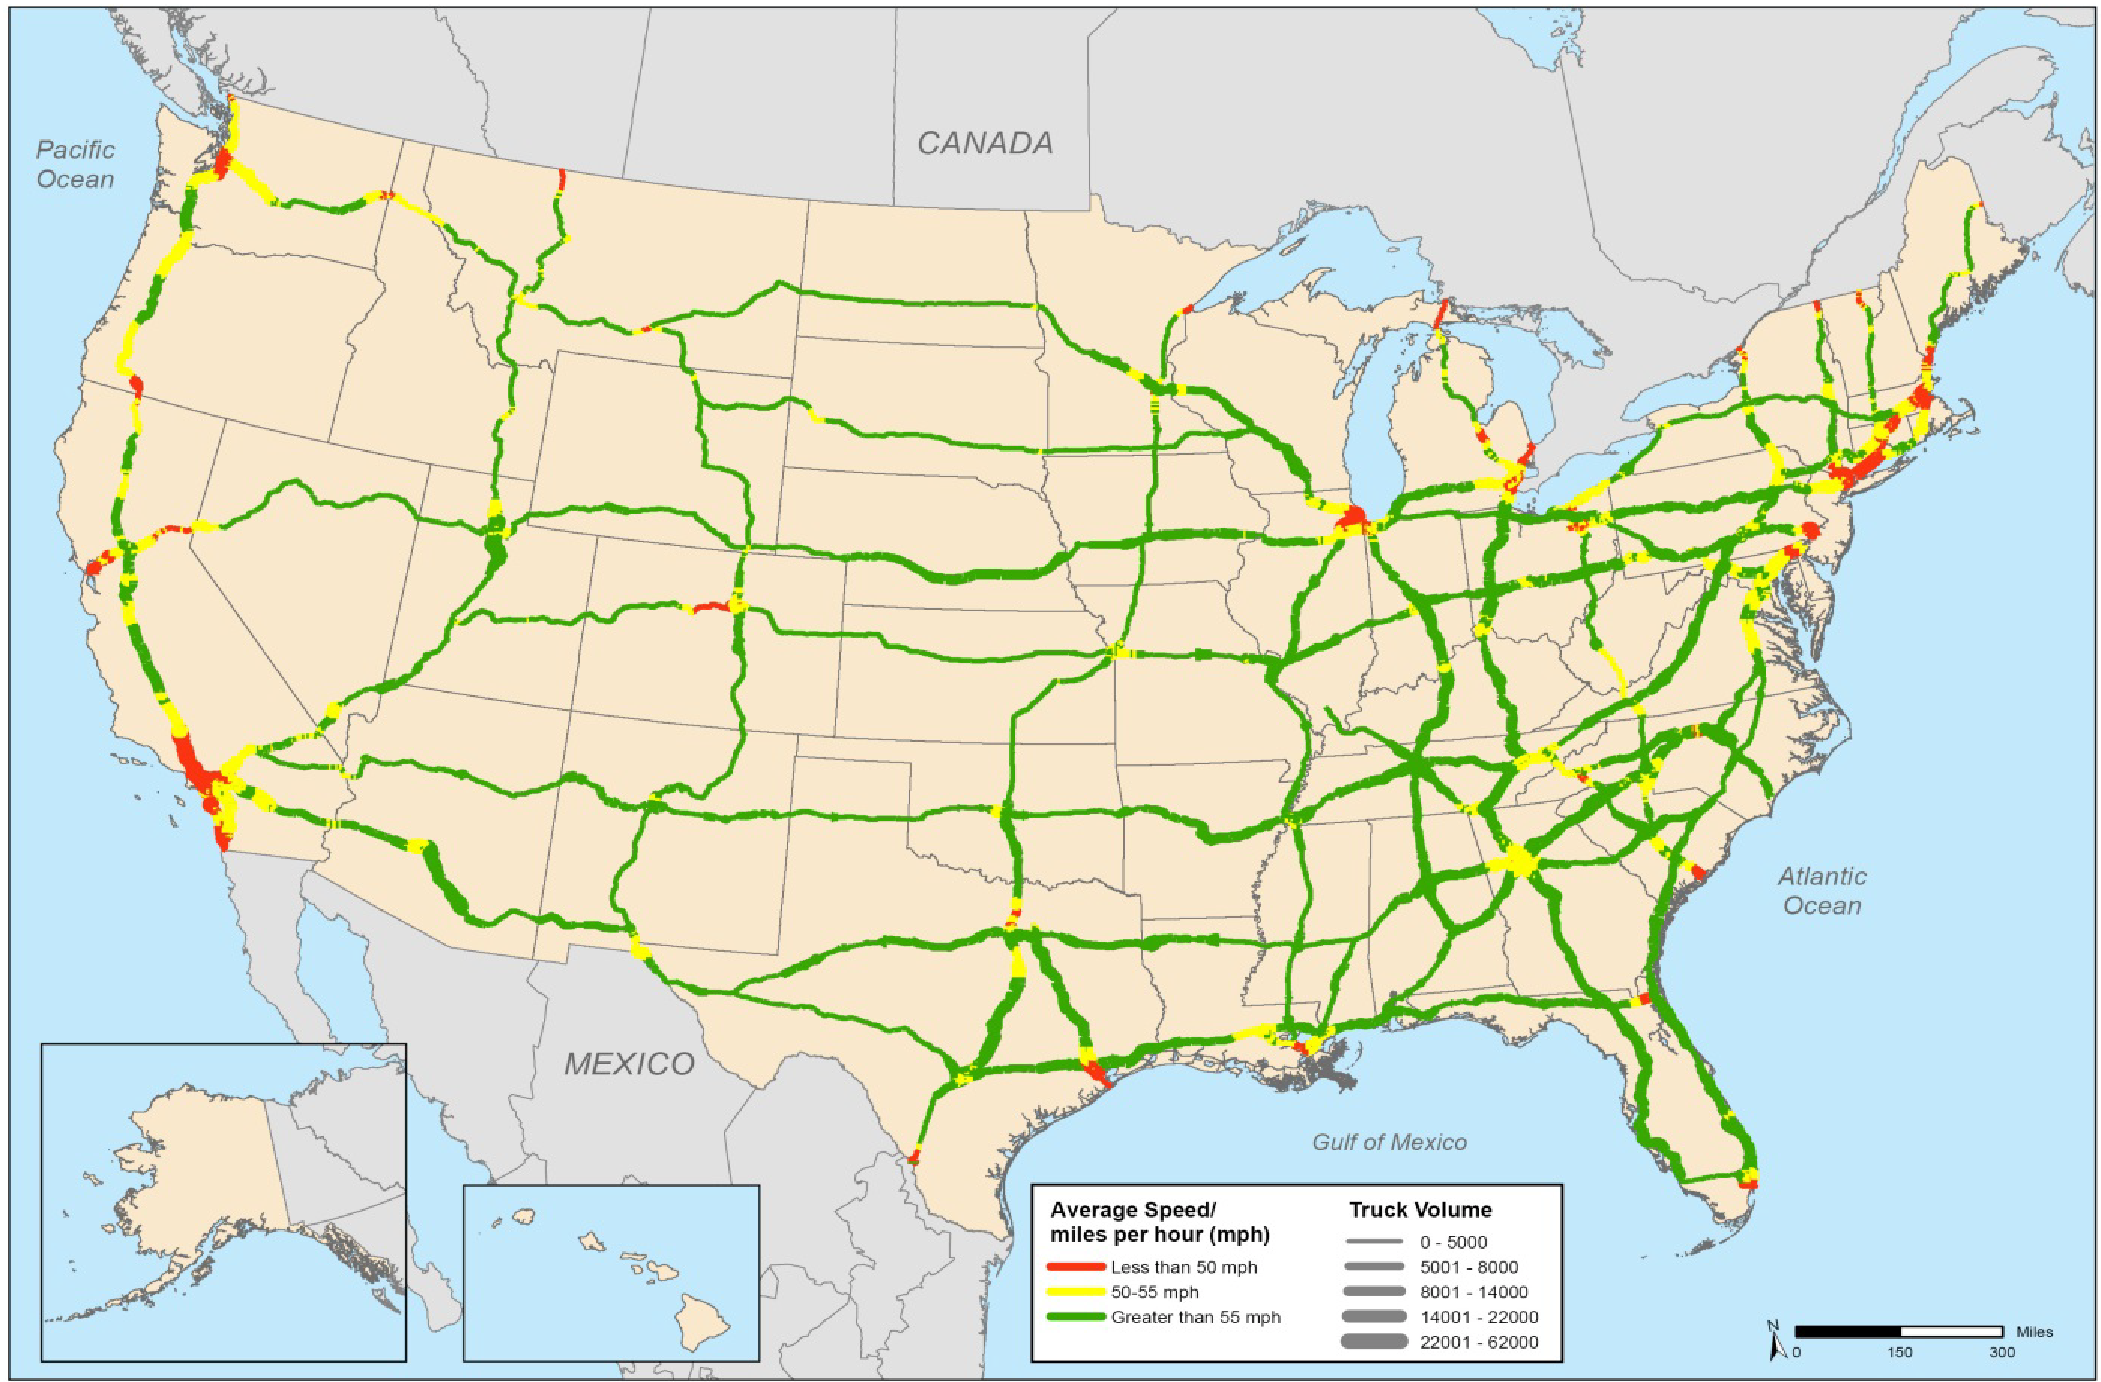 An outline map of the 48 contiguous states and insets for Alaska and Hawaii show average truck speed in miles per hour by truck volume. Truck volume is indicated by line thickness for 0 to 5,000; 5,001 to 8,000; 8,001 to 14,000; 14,001 to 22,000; and 22,001 to 62,000. Average speed is characterized by color with "less than 50 miles per hour" being red, "50-55 miles per hour" being yellow, and "greater than 55 miles per hour" being green. For interstate highways, the dominant average speed would be greater than 55 miles per hour, with truck volumes being the highest in the eastern half of the United States, decreasing as the highways move west, and increasing on the west coast. Interstate highways with the average speed of less than 50 miles per hour are greatest in the northeast and southwest, with some instances in Washington and areas of the Midwest. Interstate highways with the average speed of 50 to 55 miles per hour are scattered throughout the U.S. with higher truck volumes seen in the northeast, Atlanta, and the west coast. <em>Sources: U.S. Department of Transportation, Federal Highway Administration, Office of Freight Management and Operations, Freight Performance Measurement Program, 2013.